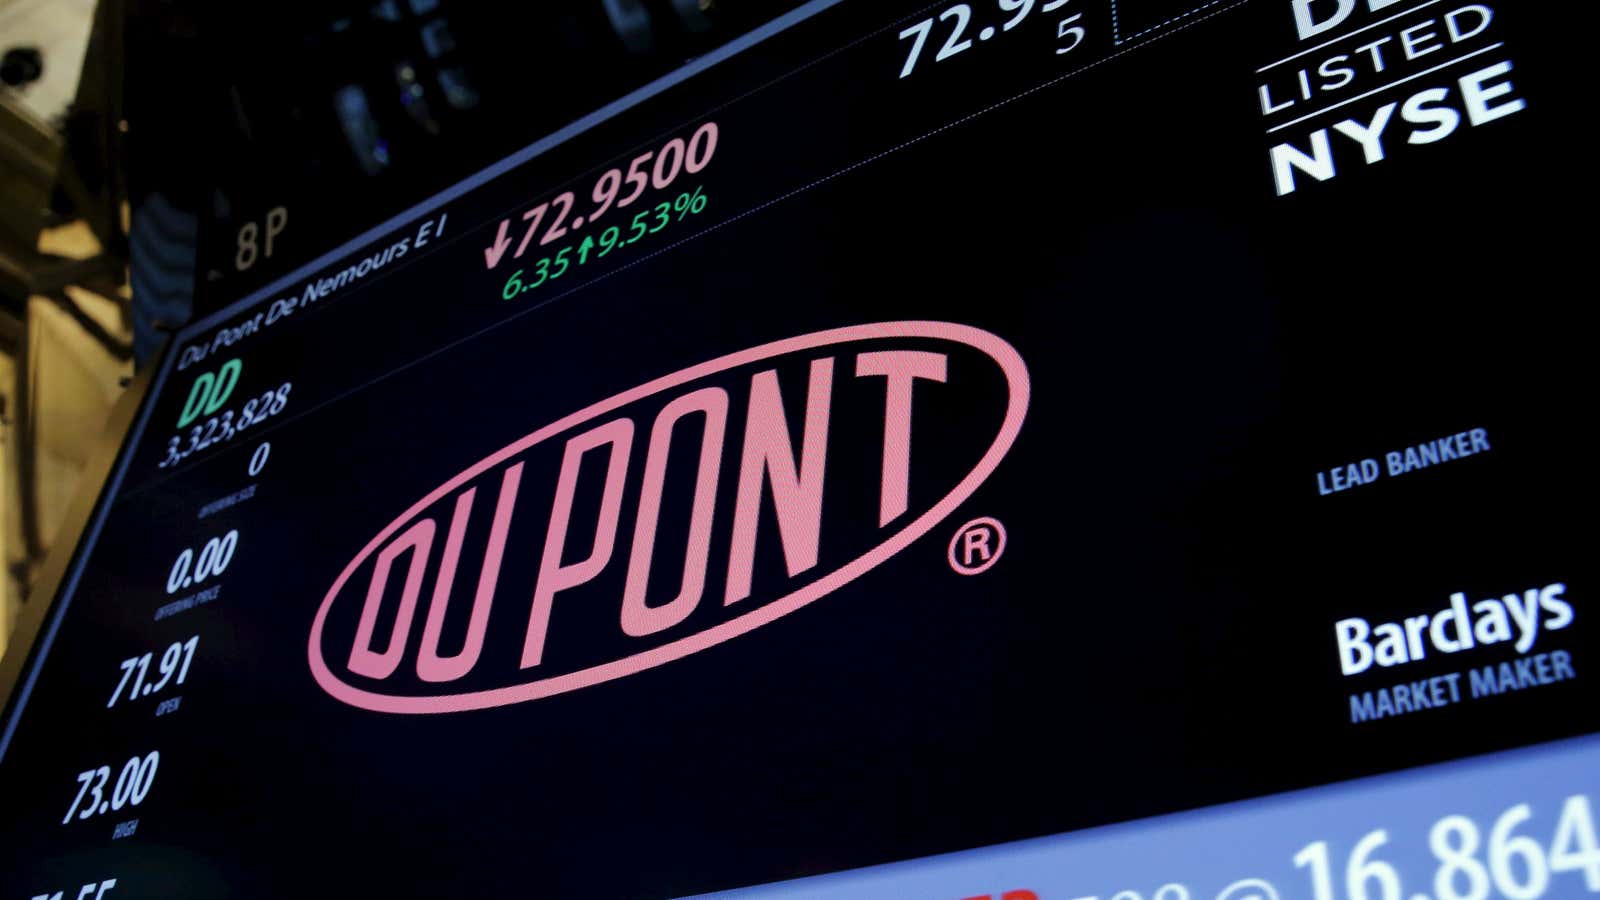 The roots of the DuPont company stretch back to 1802.